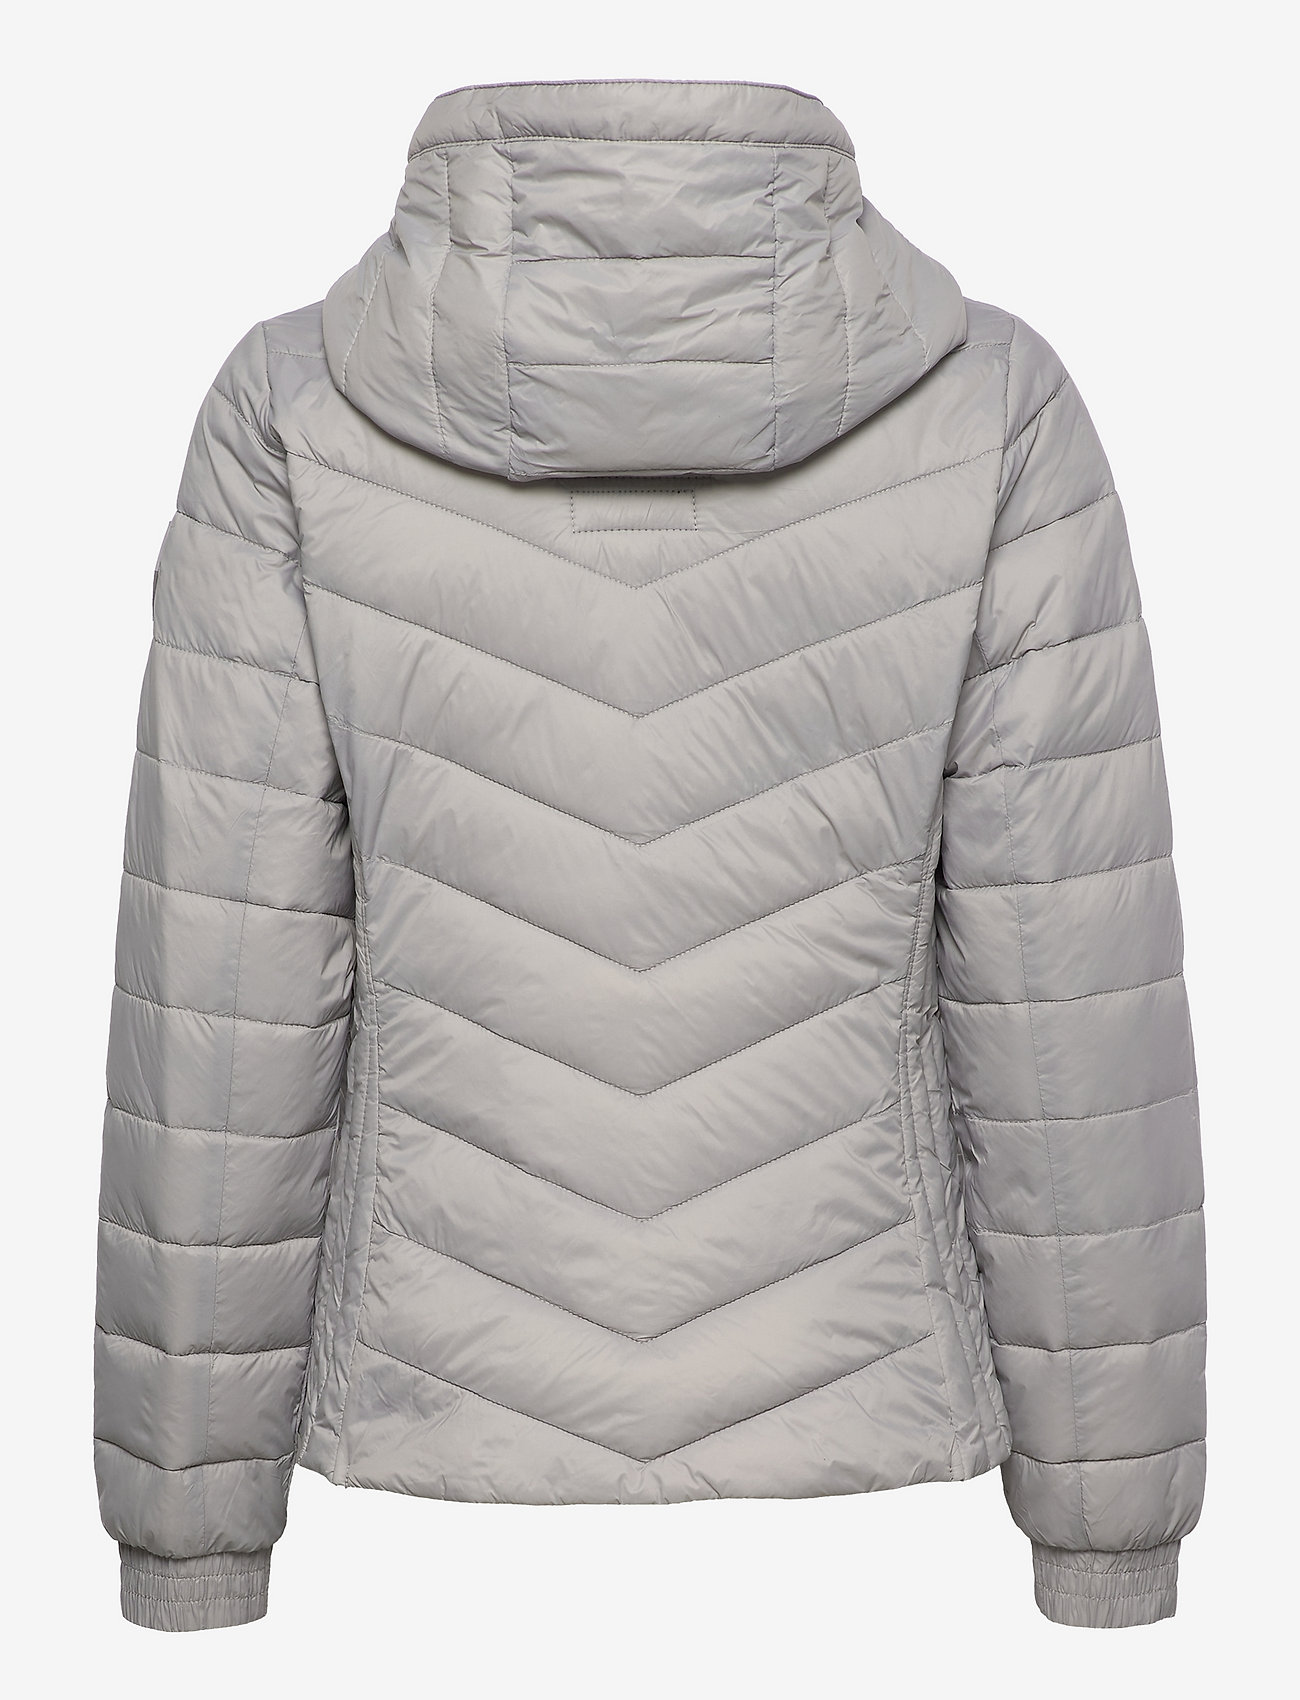 Hollister - HCo. GIRLS OUTERWEAR - down- & padded jackets - quiet grey - 1